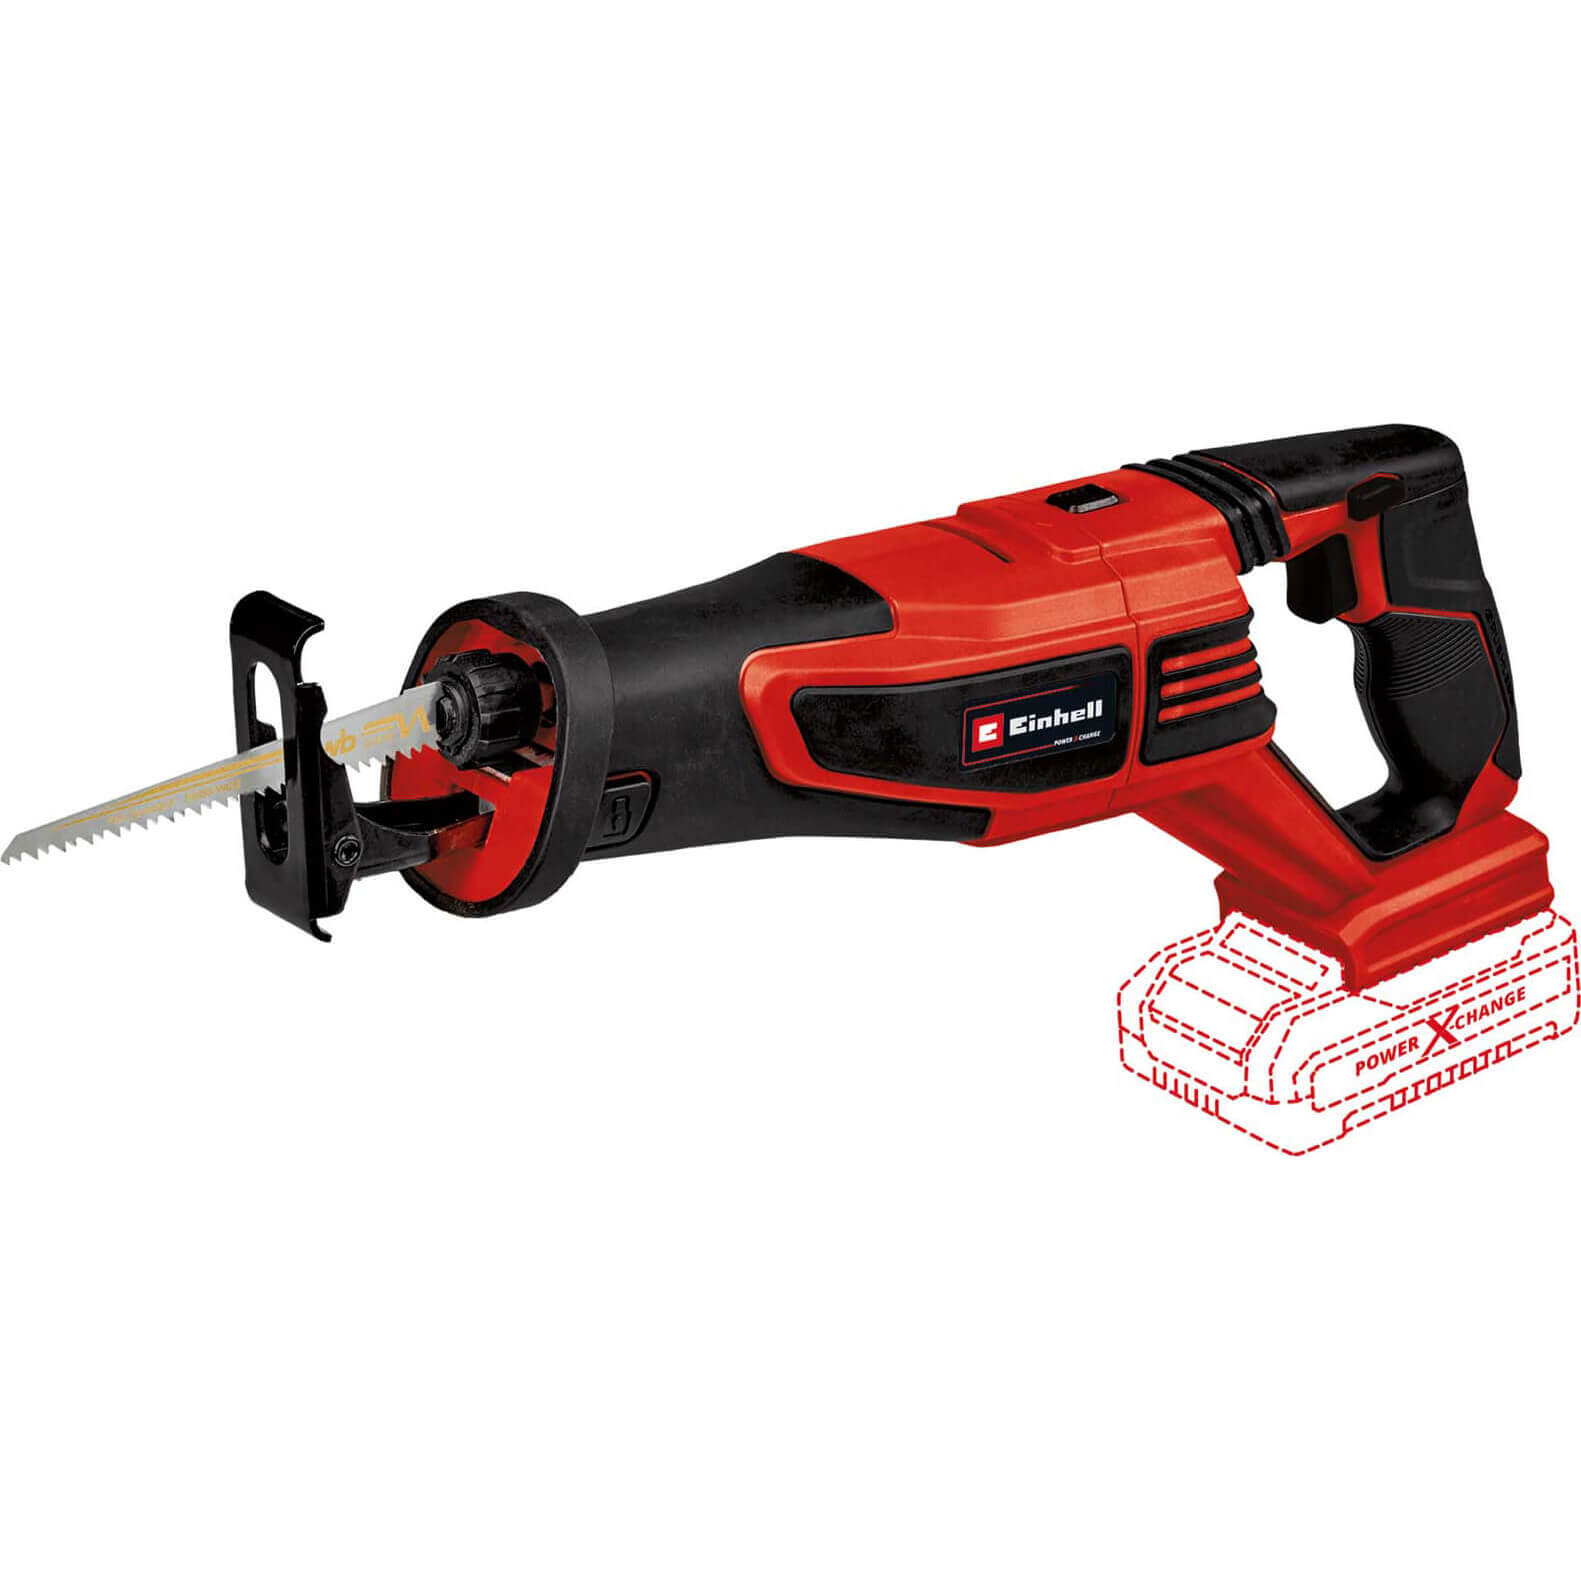 Photo of Einhell Te-ap Li Bl 18v Cordless Brushless Reciprocating Saw No Batteries No Charger No Case